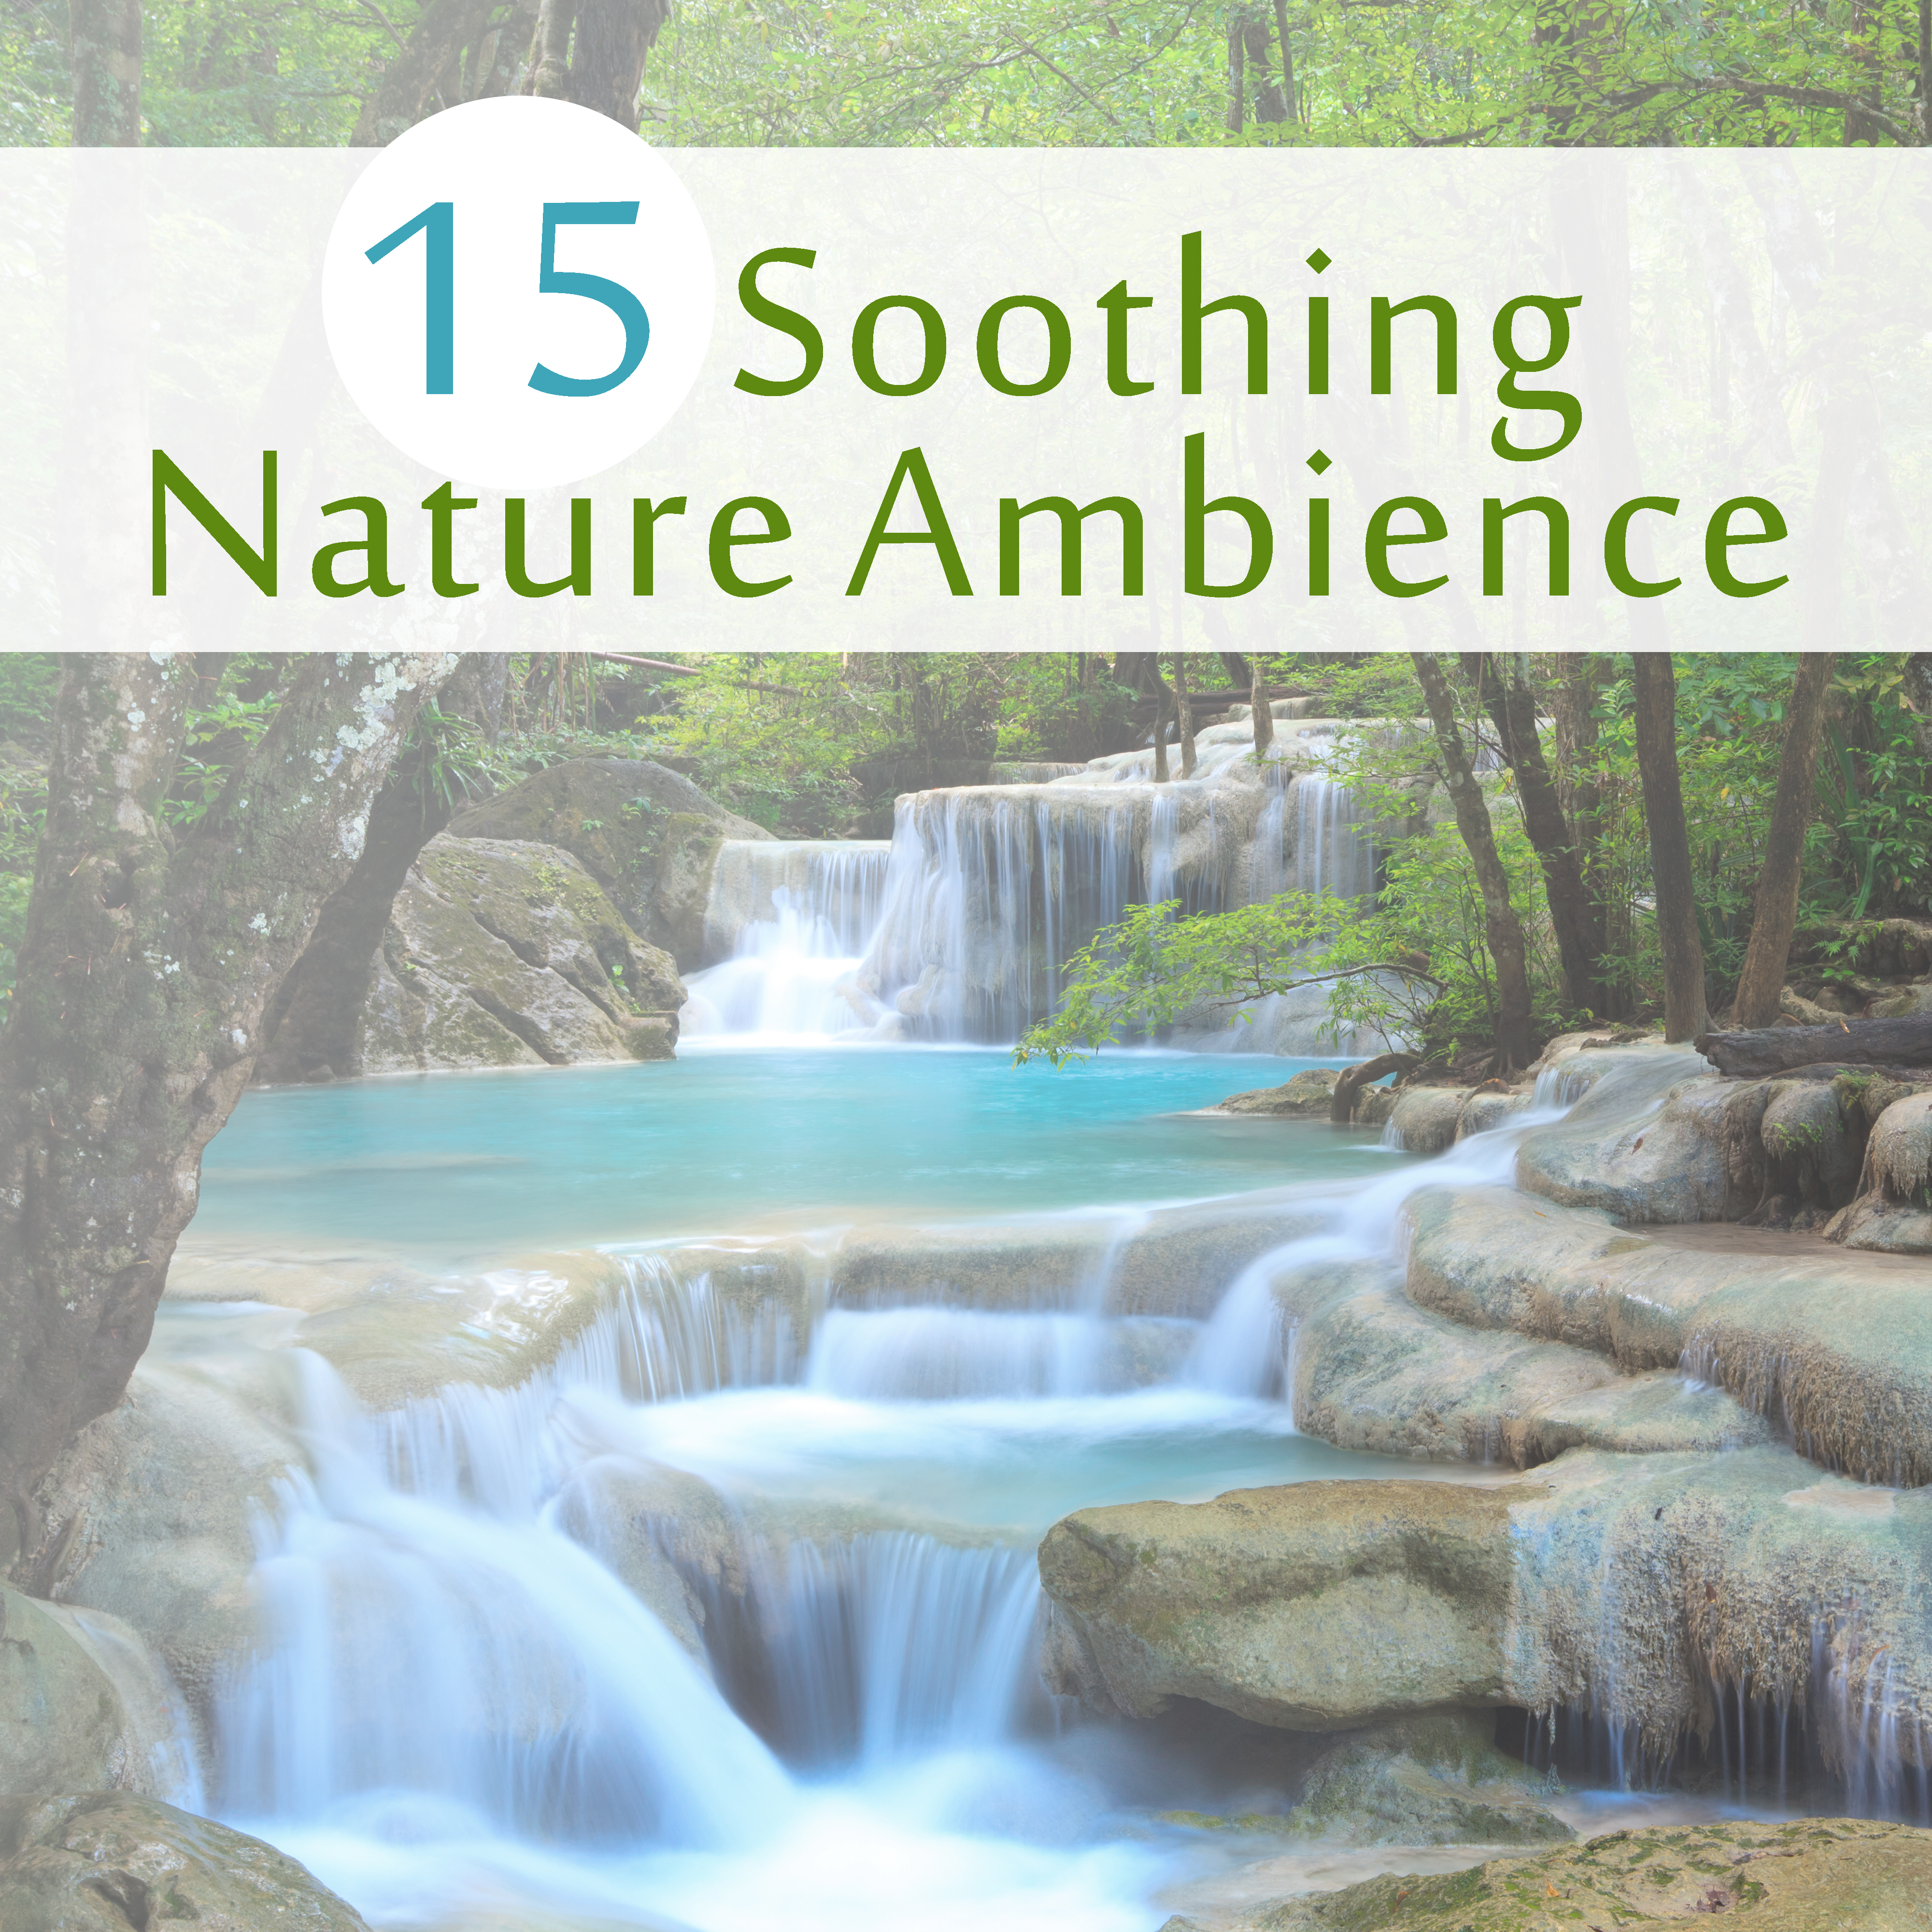 15 Soothing Nature Ambience